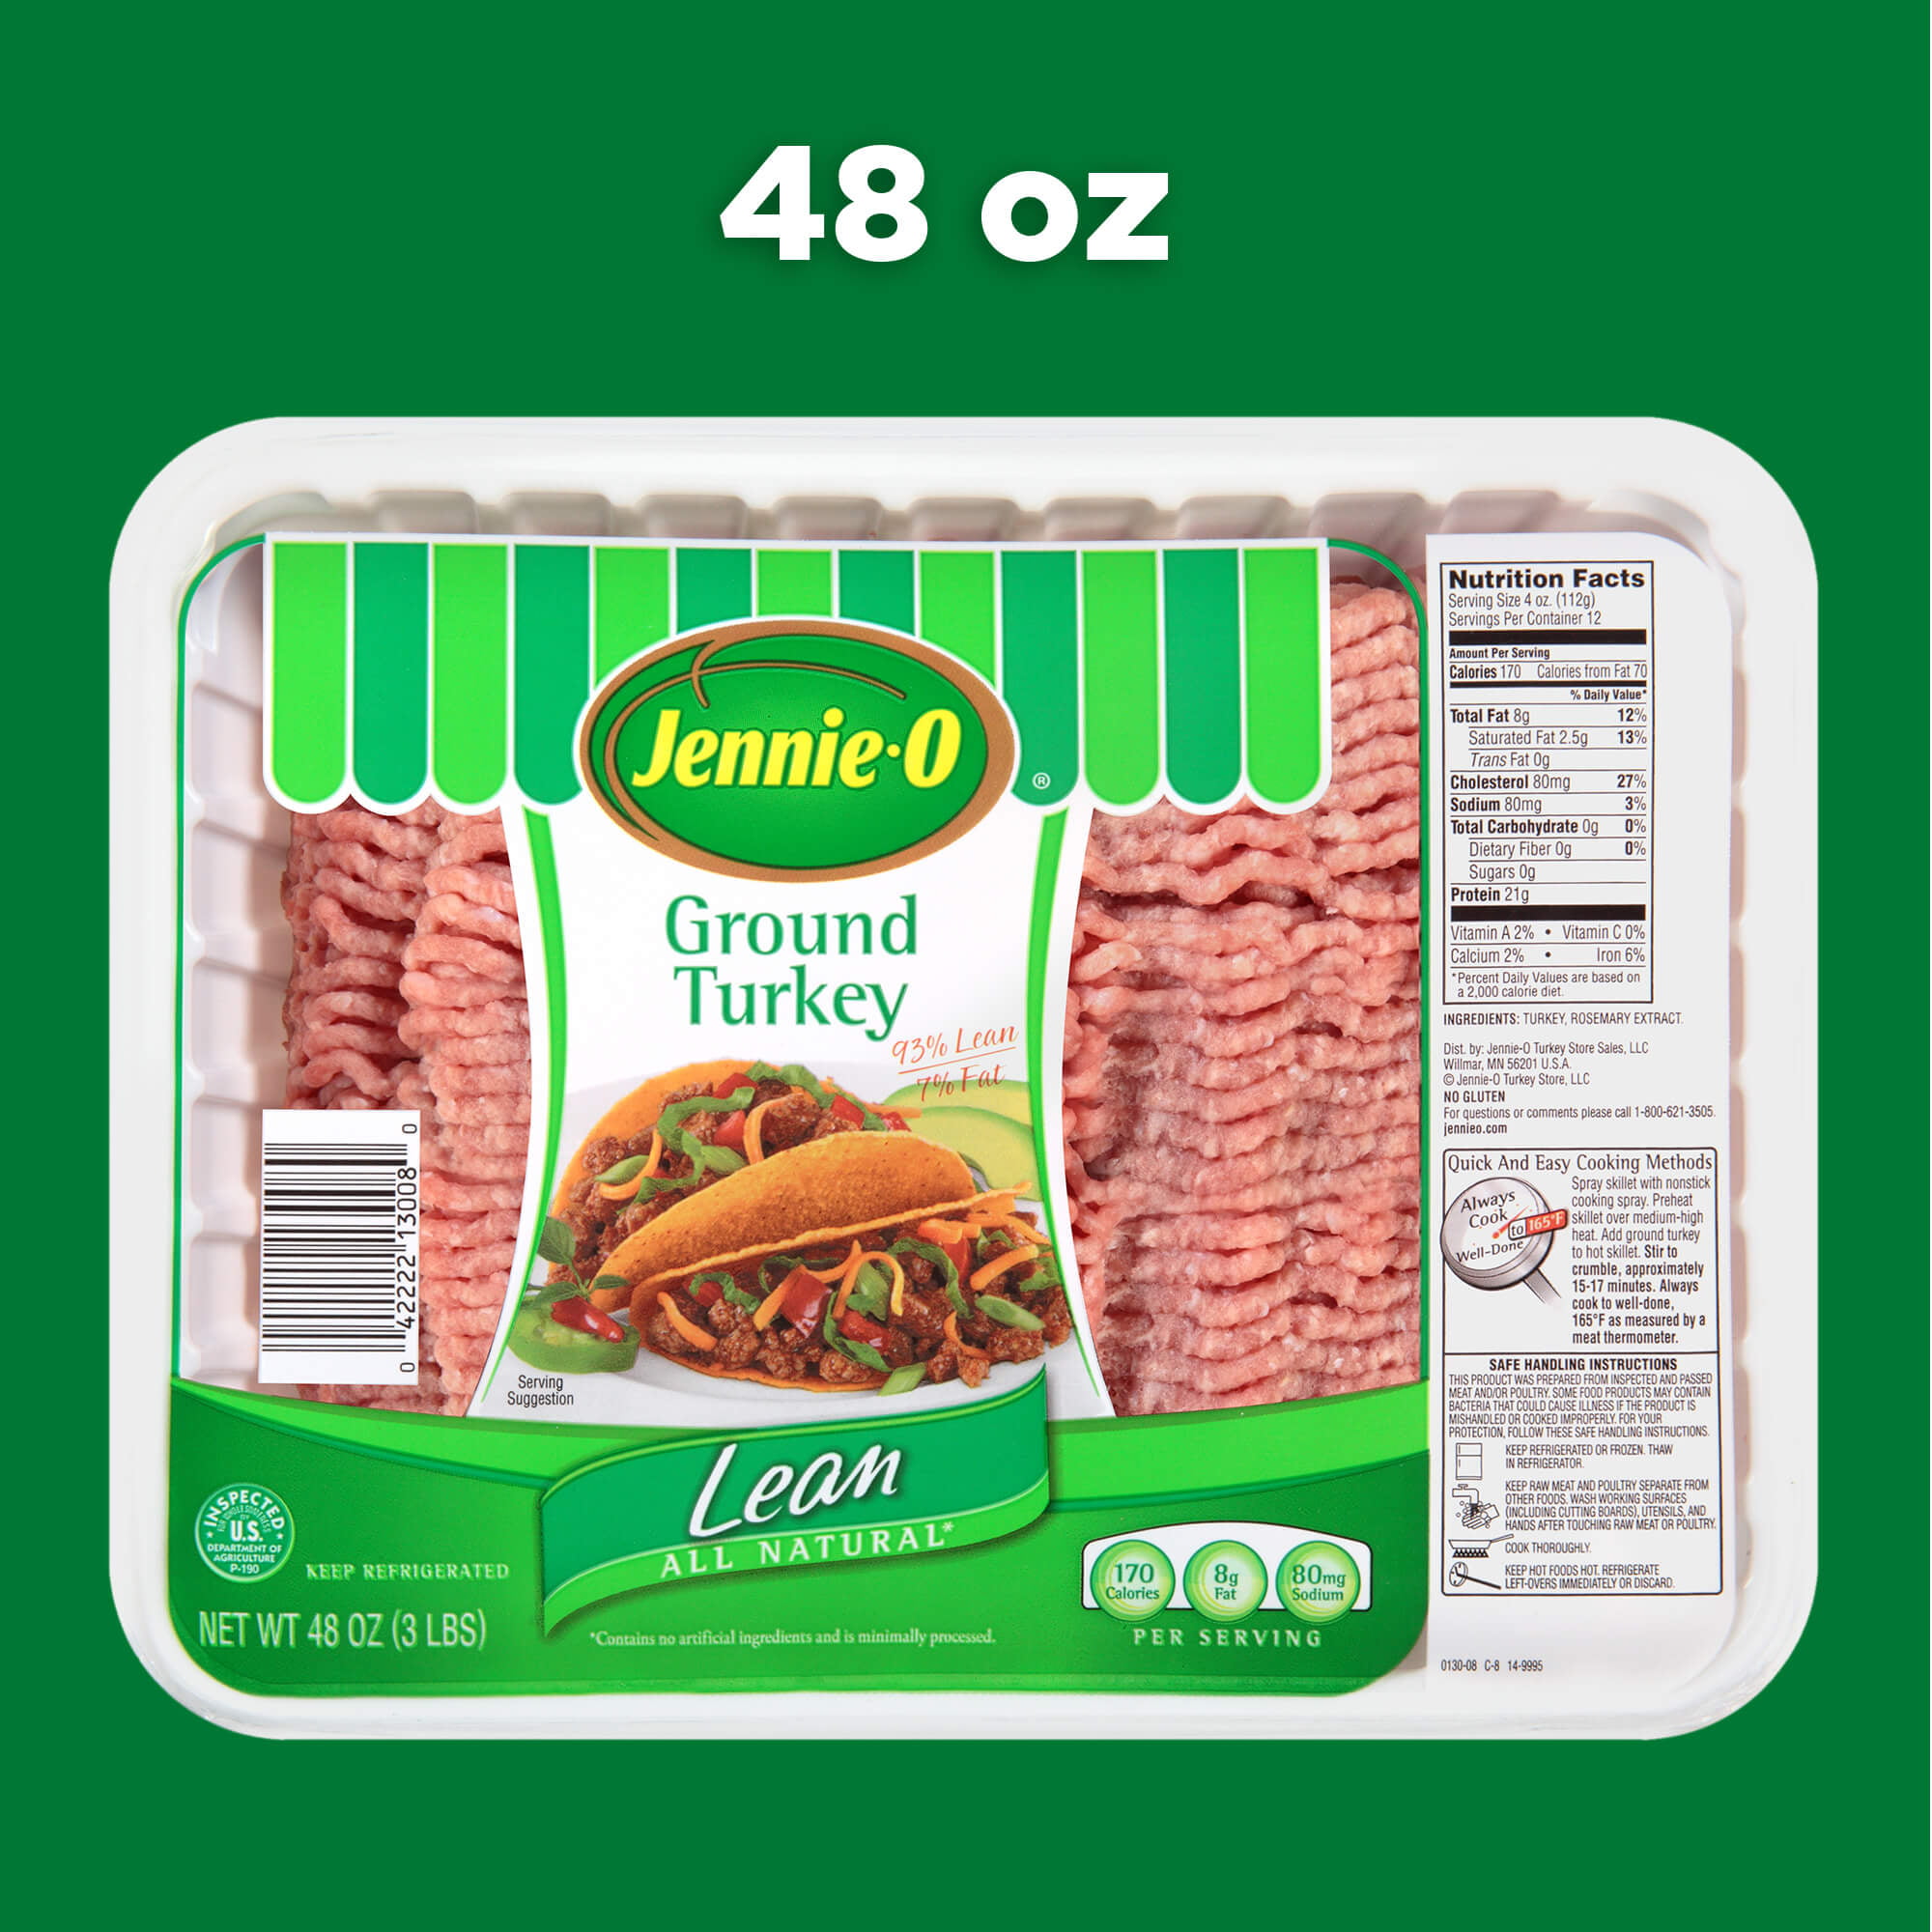 3 Oz Ground Turkey Nutrition - NutritionWalls What Does An Ounce Of Turkey Look Like